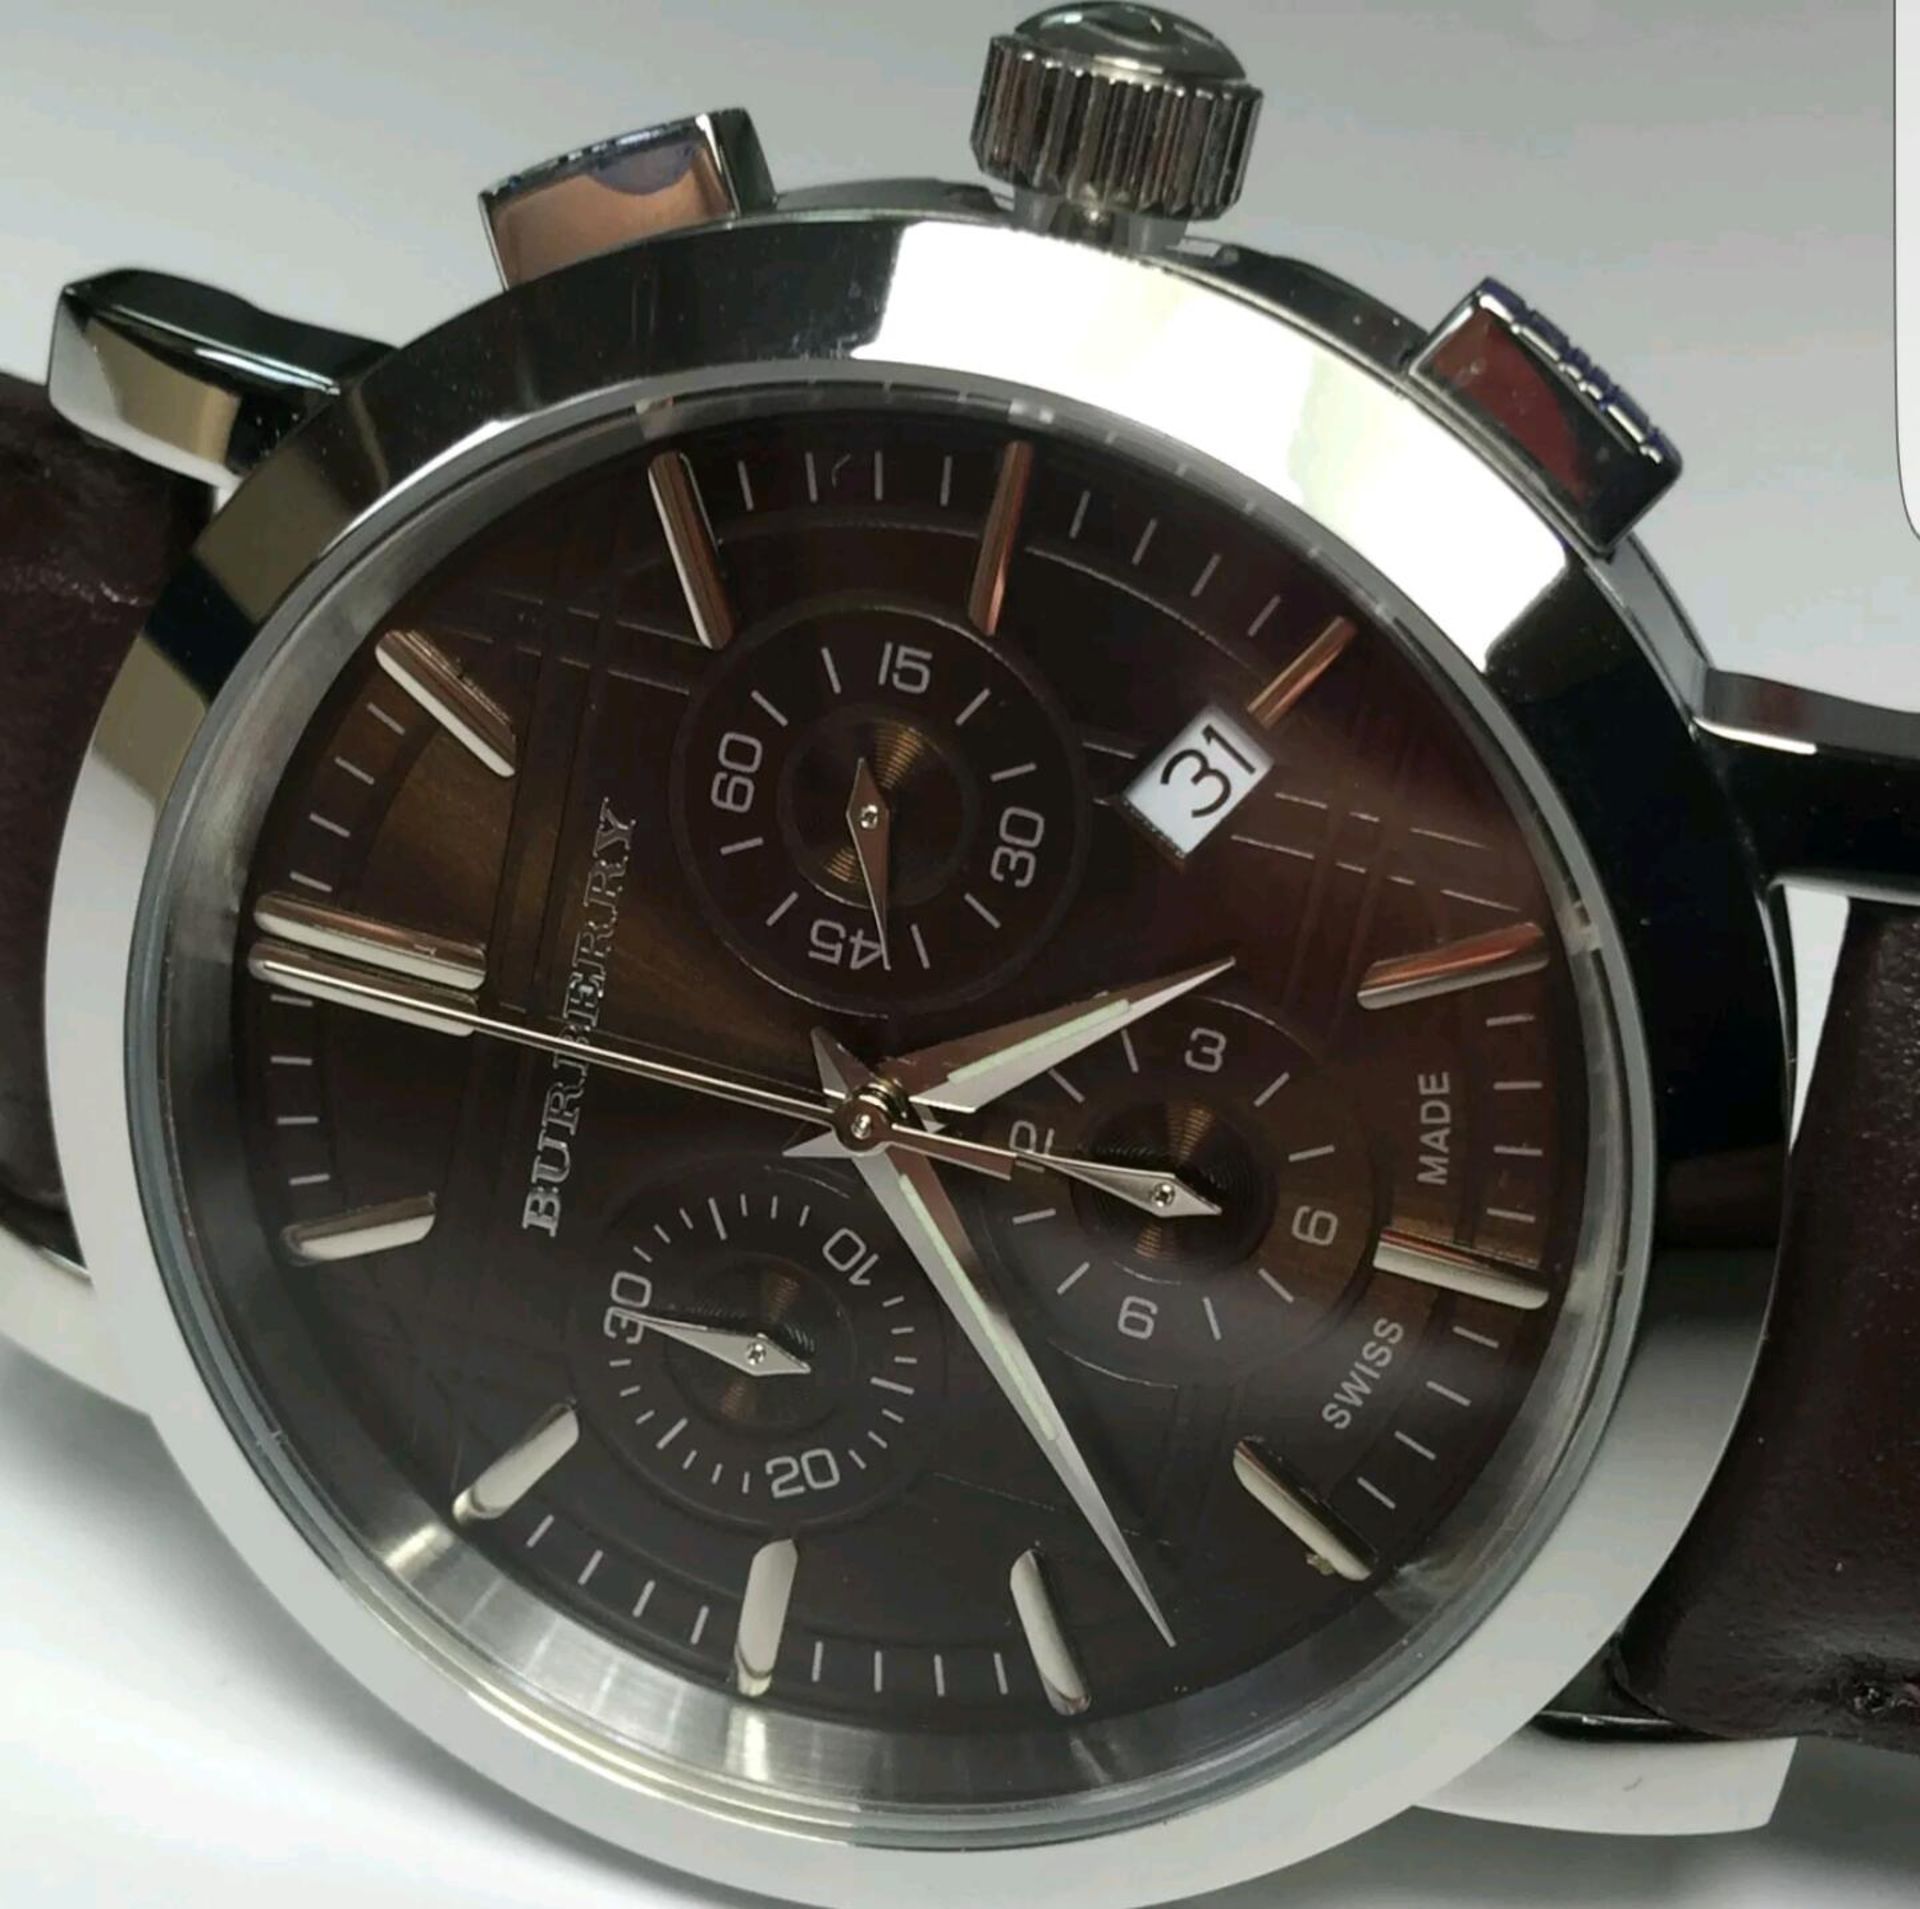 BRAND NEW GENTS BURBERRY WATCH, BU1383, COMPLETE WITH ORIGINAL BOX AND MANUAL - RRP £399